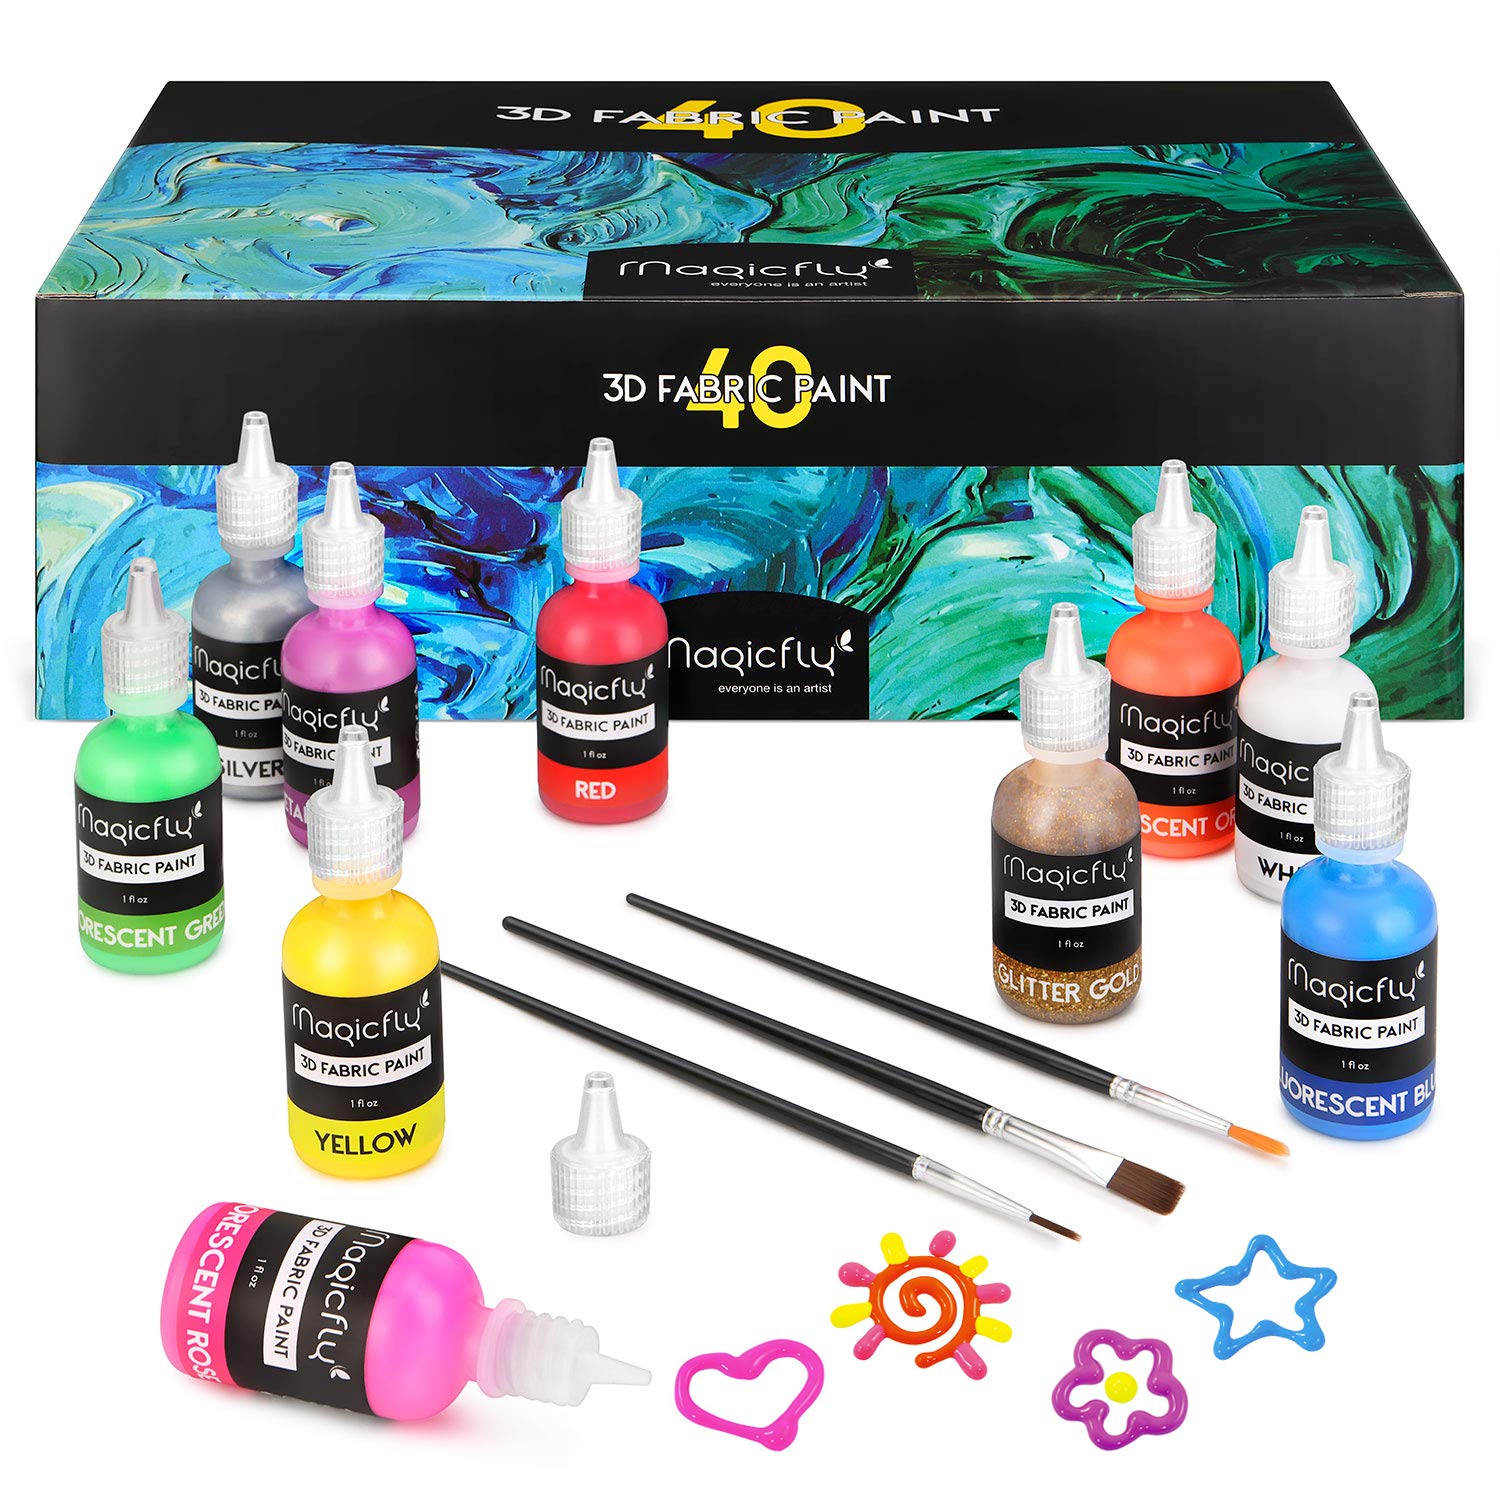 Magicfly 3D Fabric Permanent Paint 40 Color, Puffy Paint with Vibrant Colors, 3 Bonus Brushes & Stencils, Ideal for Textile T-shirts Fabrics Canvas